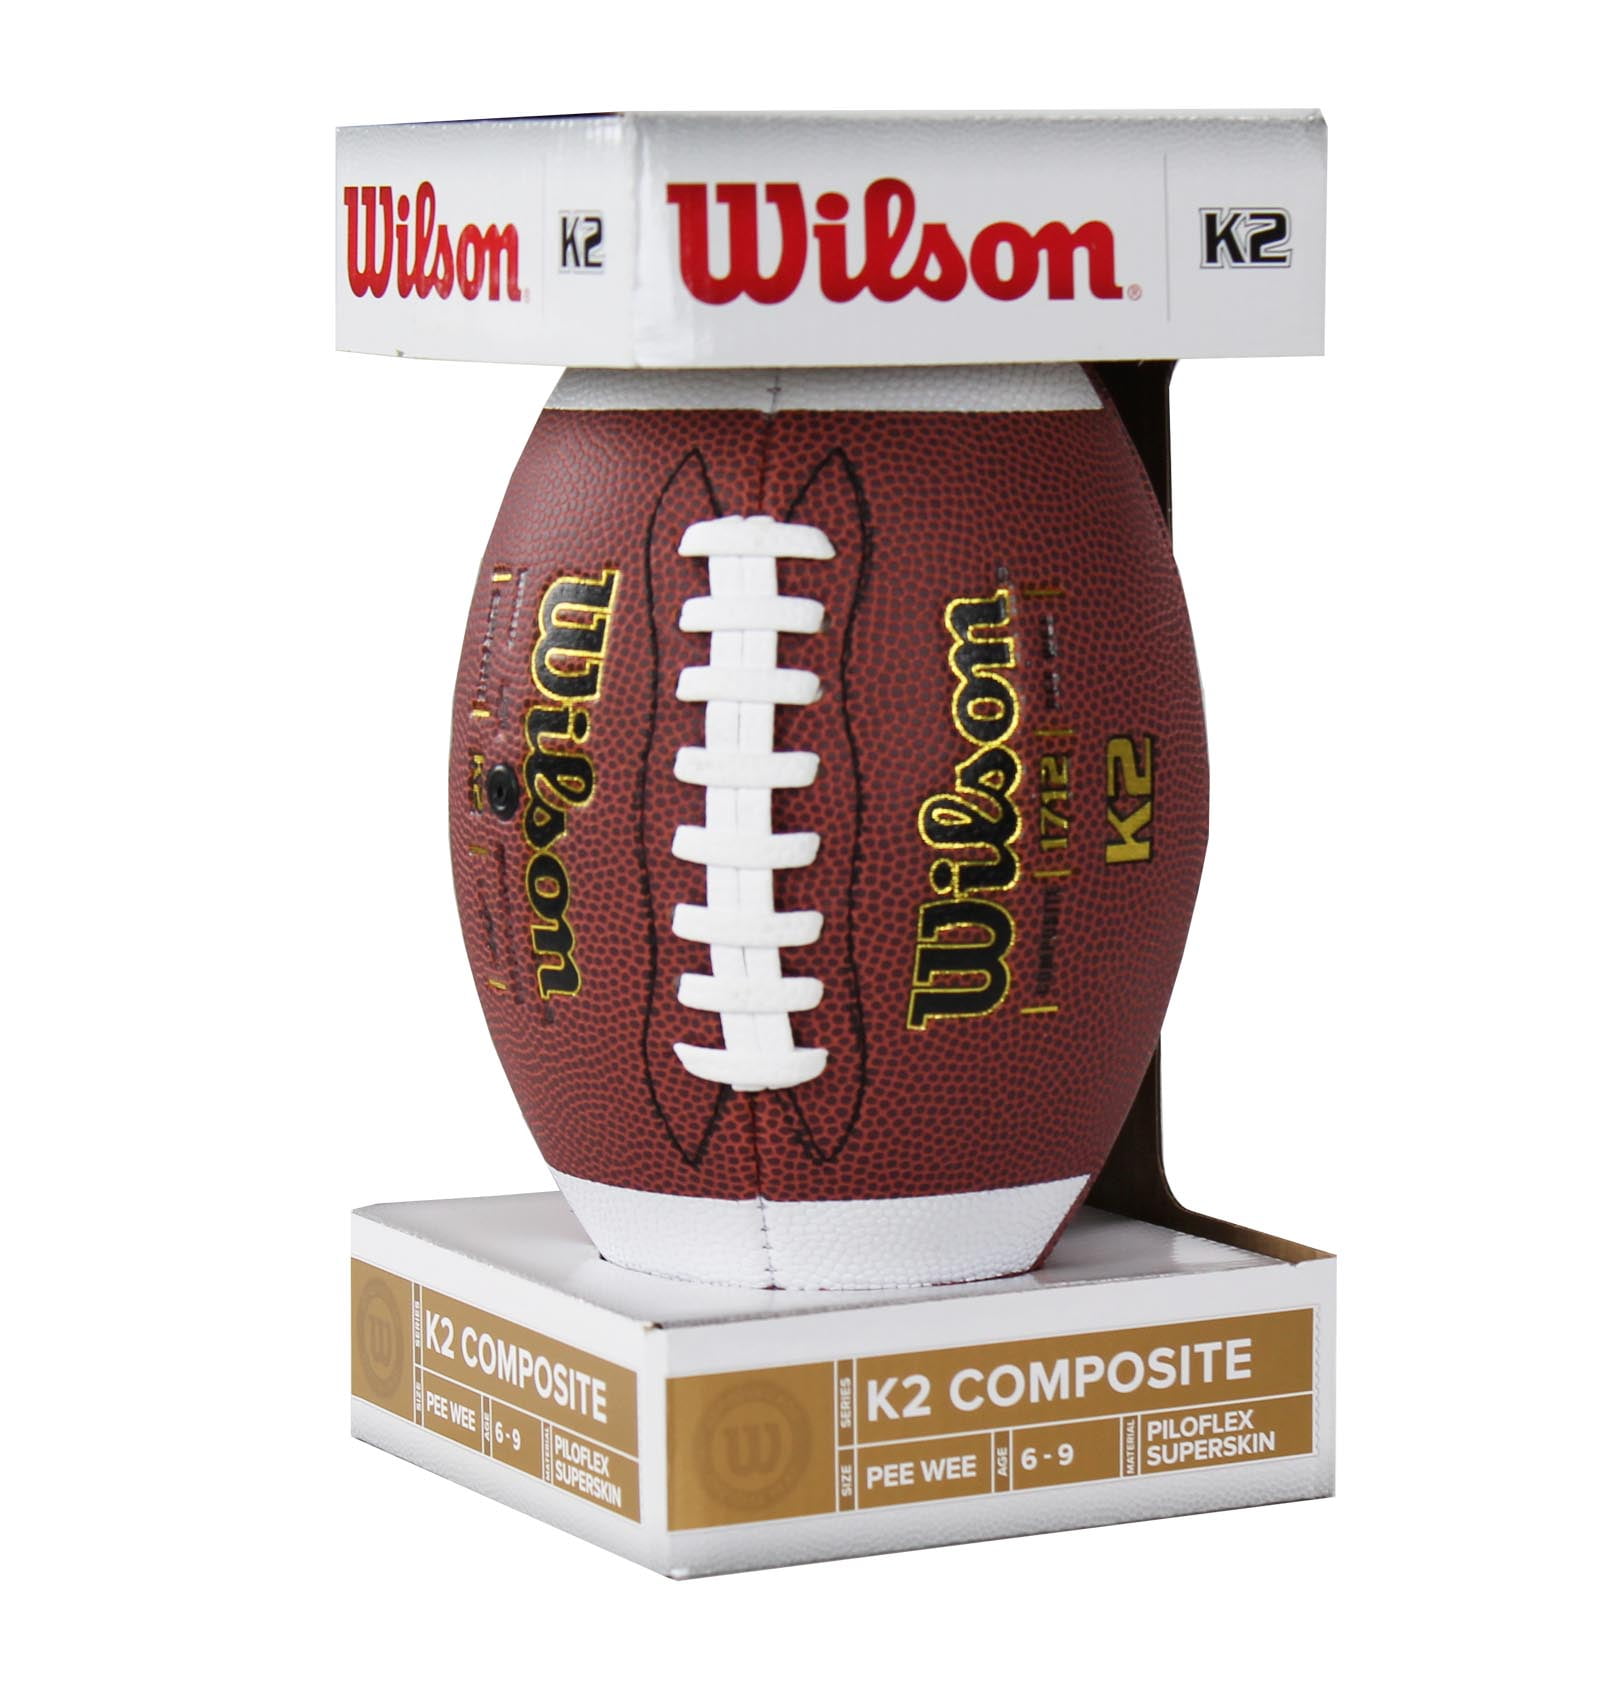 Wilson K2 Traditional LEATHER Pee Wee 1382 Football 